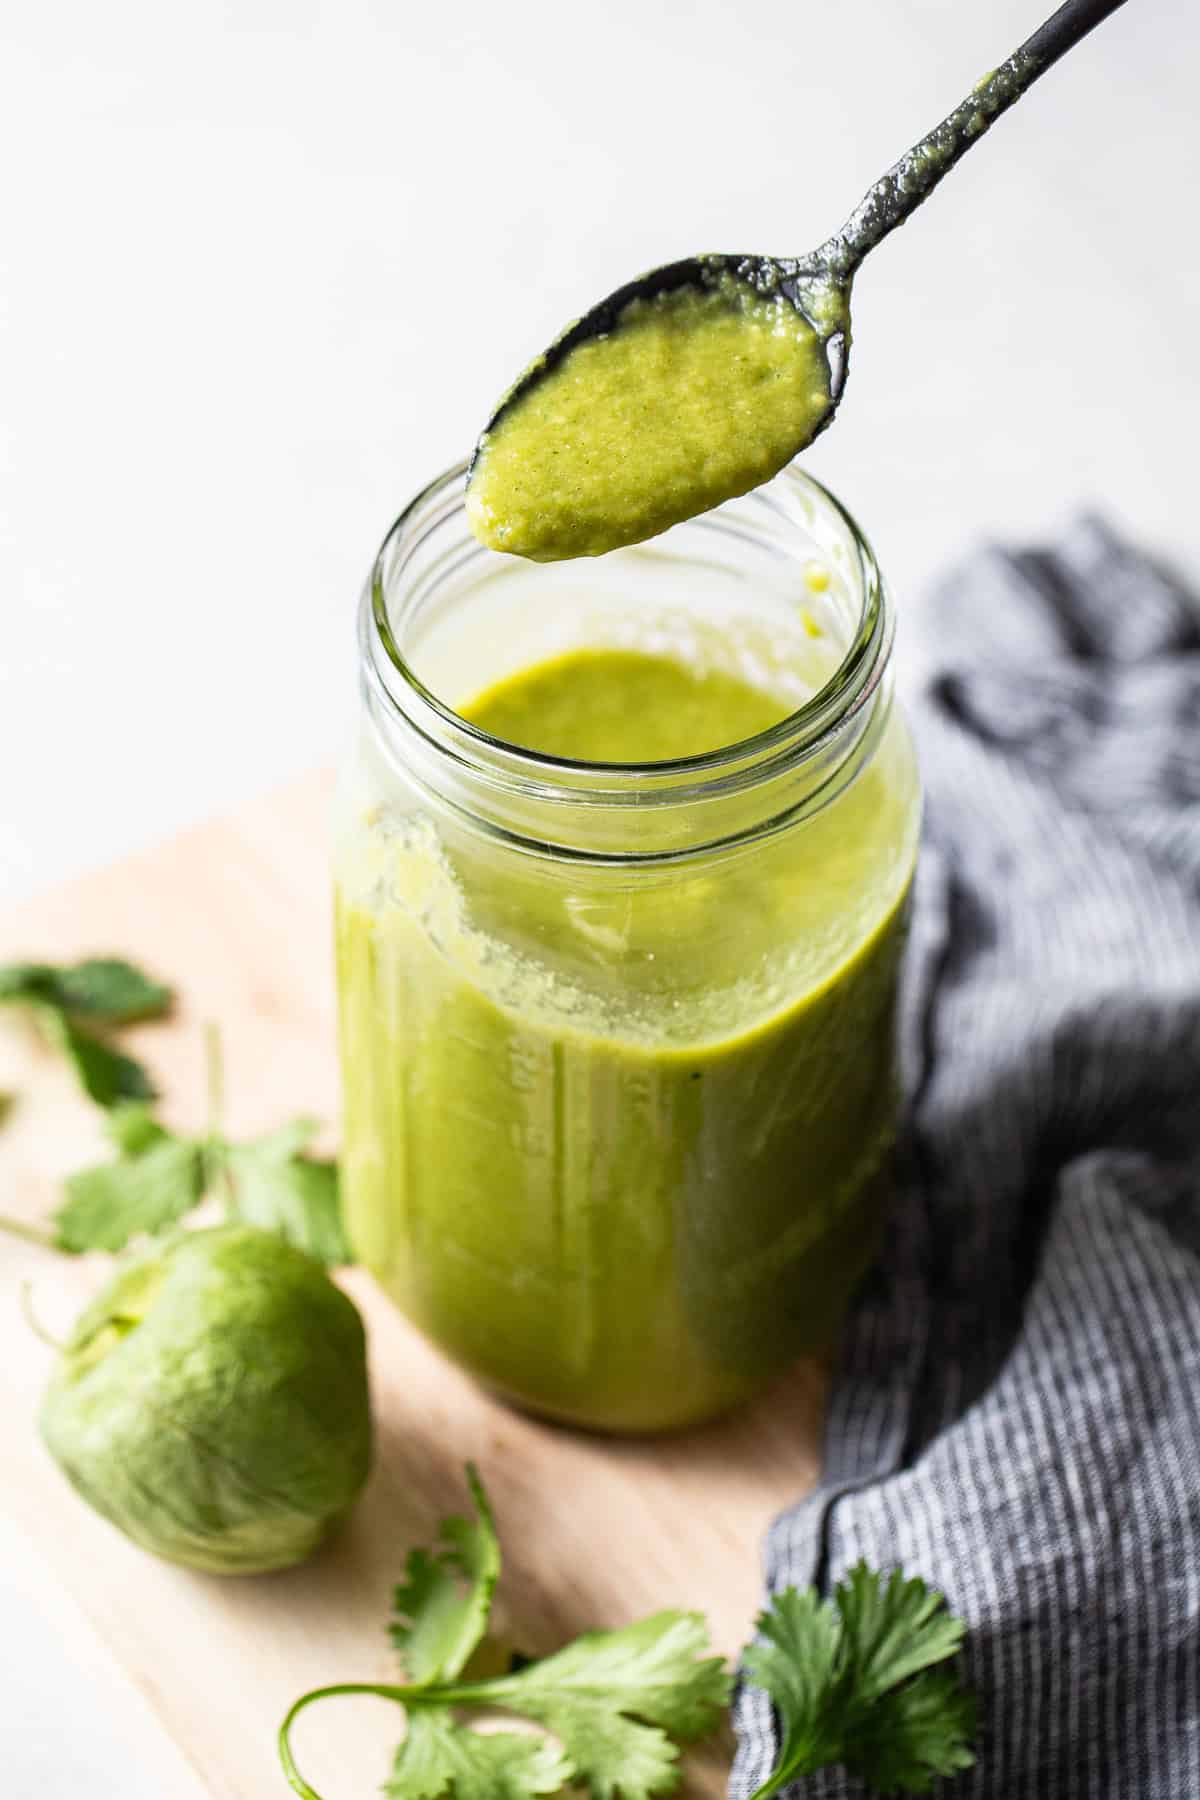 Green enchilada sauce stored in a jar ready to use